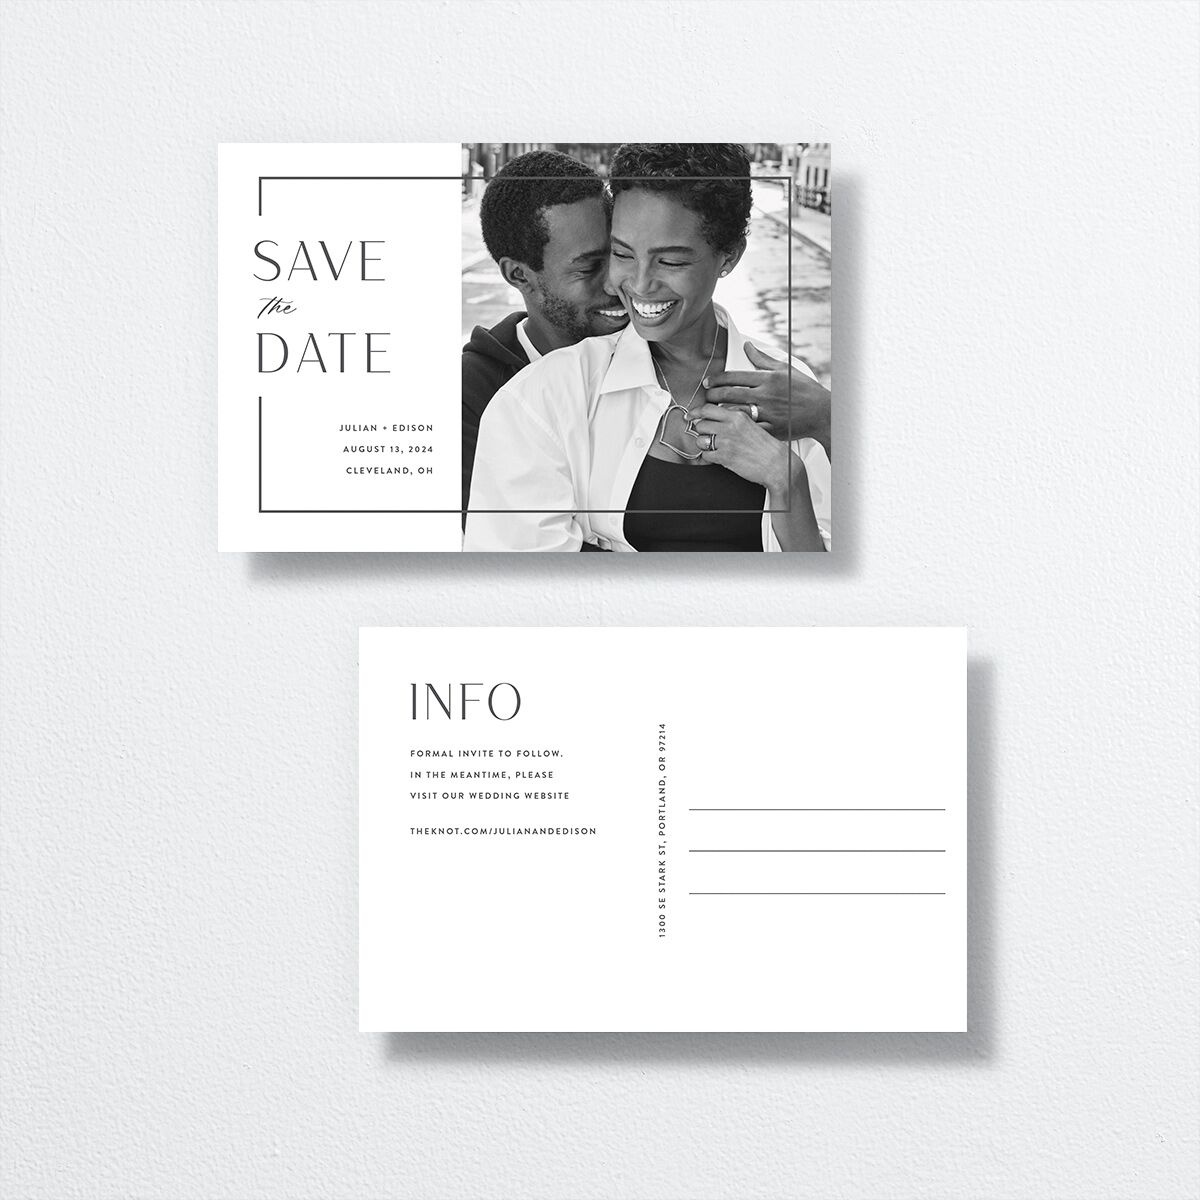 Modern Minimalist Save The Date Postcards by Vera Wang front-and-back